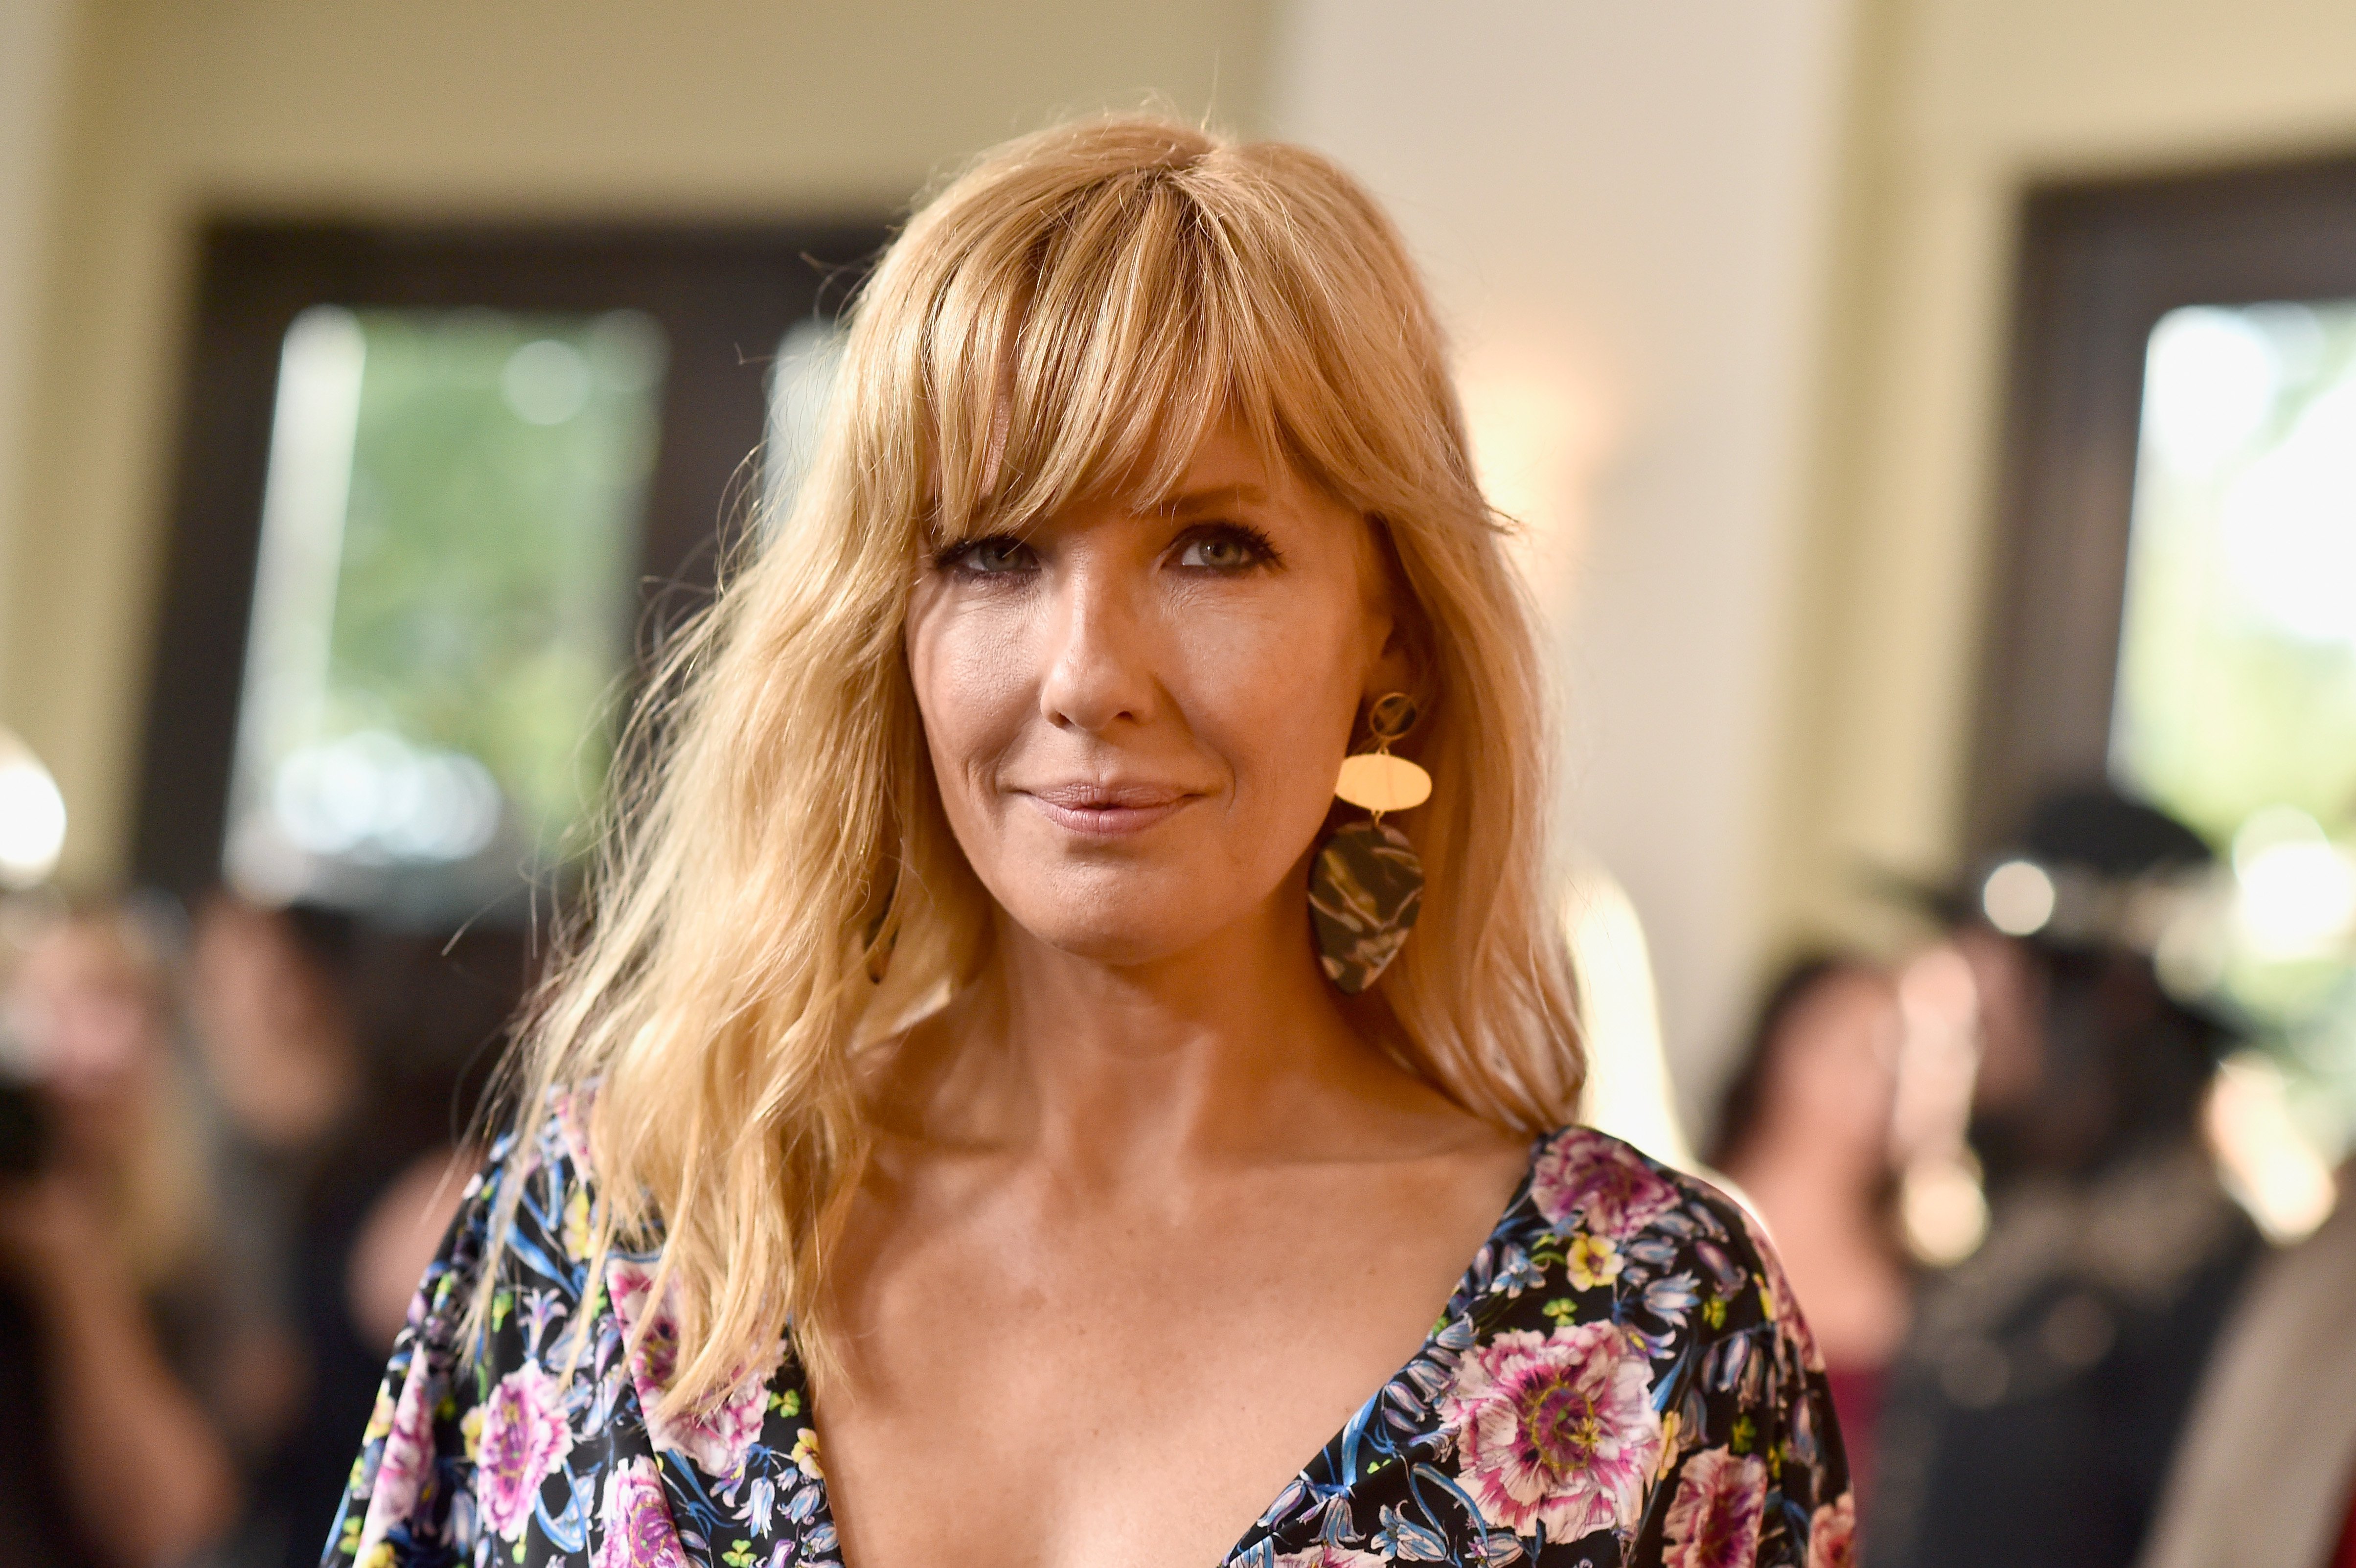 Kelly Reilly attends "Yellowstone" premiere at Paramount Pictures on June 11, 2018, in Los Angeles, California. | Source: Getty Images